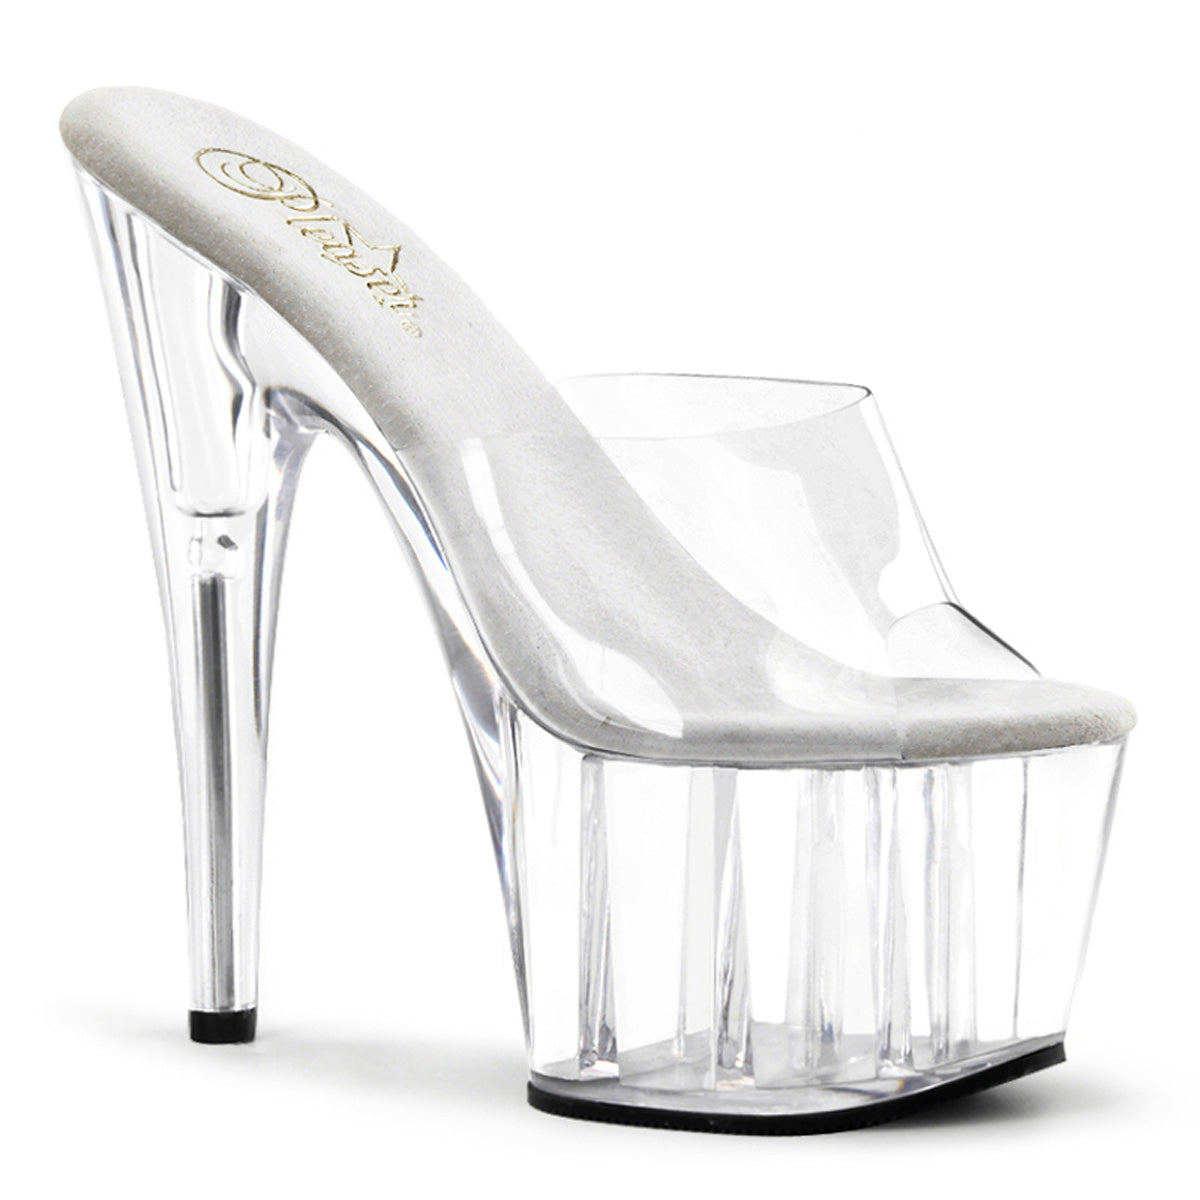 ADORE-701 / C / M 7 "PLEASER FAST DELIVERY 24-48h 